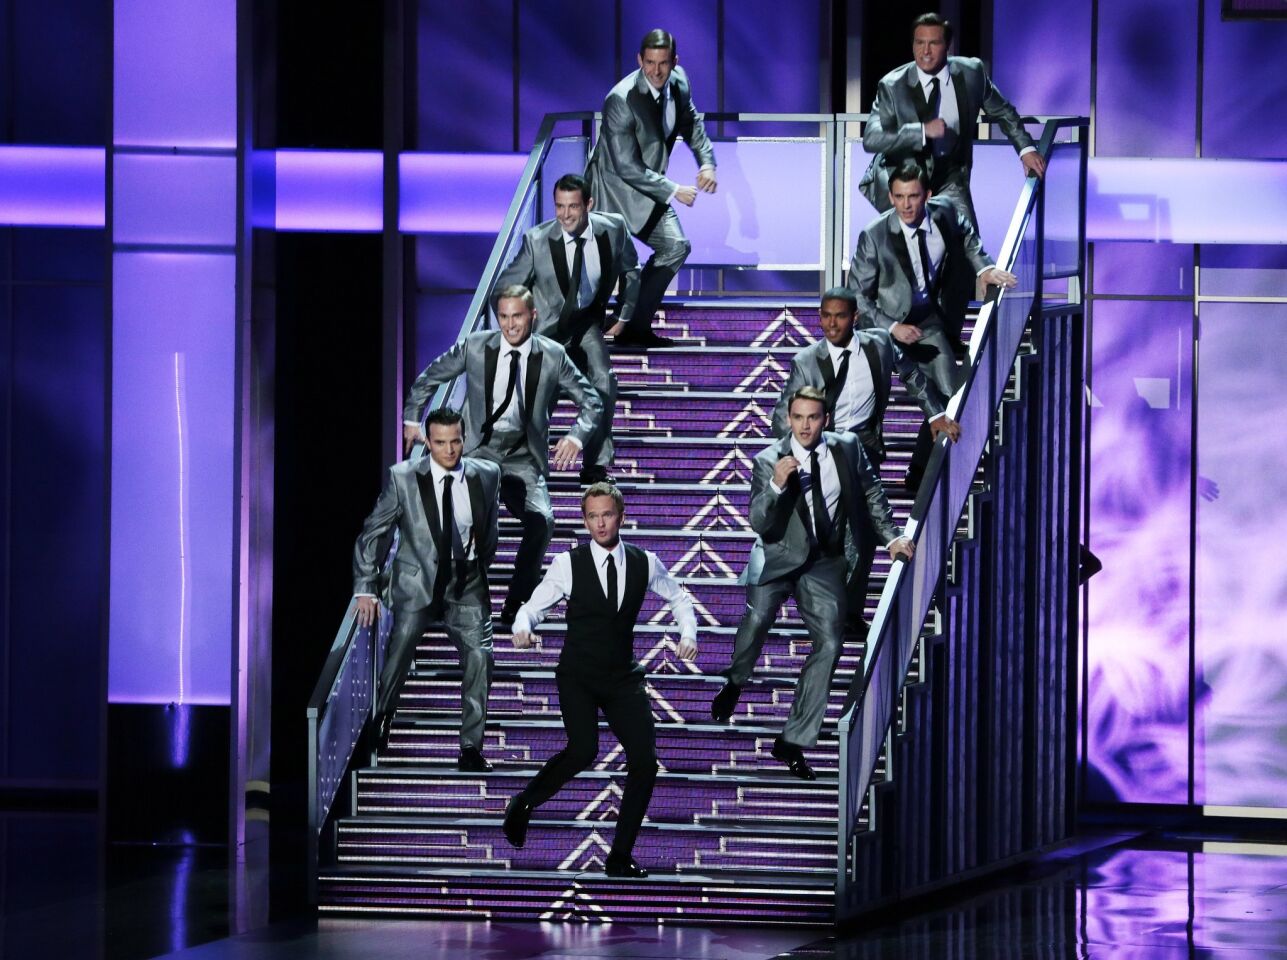 Here's where we say something about how host Neil Patrick Harris seemed obligated to do a song-and-dance number for the Emmys and, therefore, did a song called "This Is the Number in the Middle of the Show," which seemed uninspired and dull. And then we wrote something about how it didn't seem like anyone really cared enough to put their hearts into it. And neither did we.